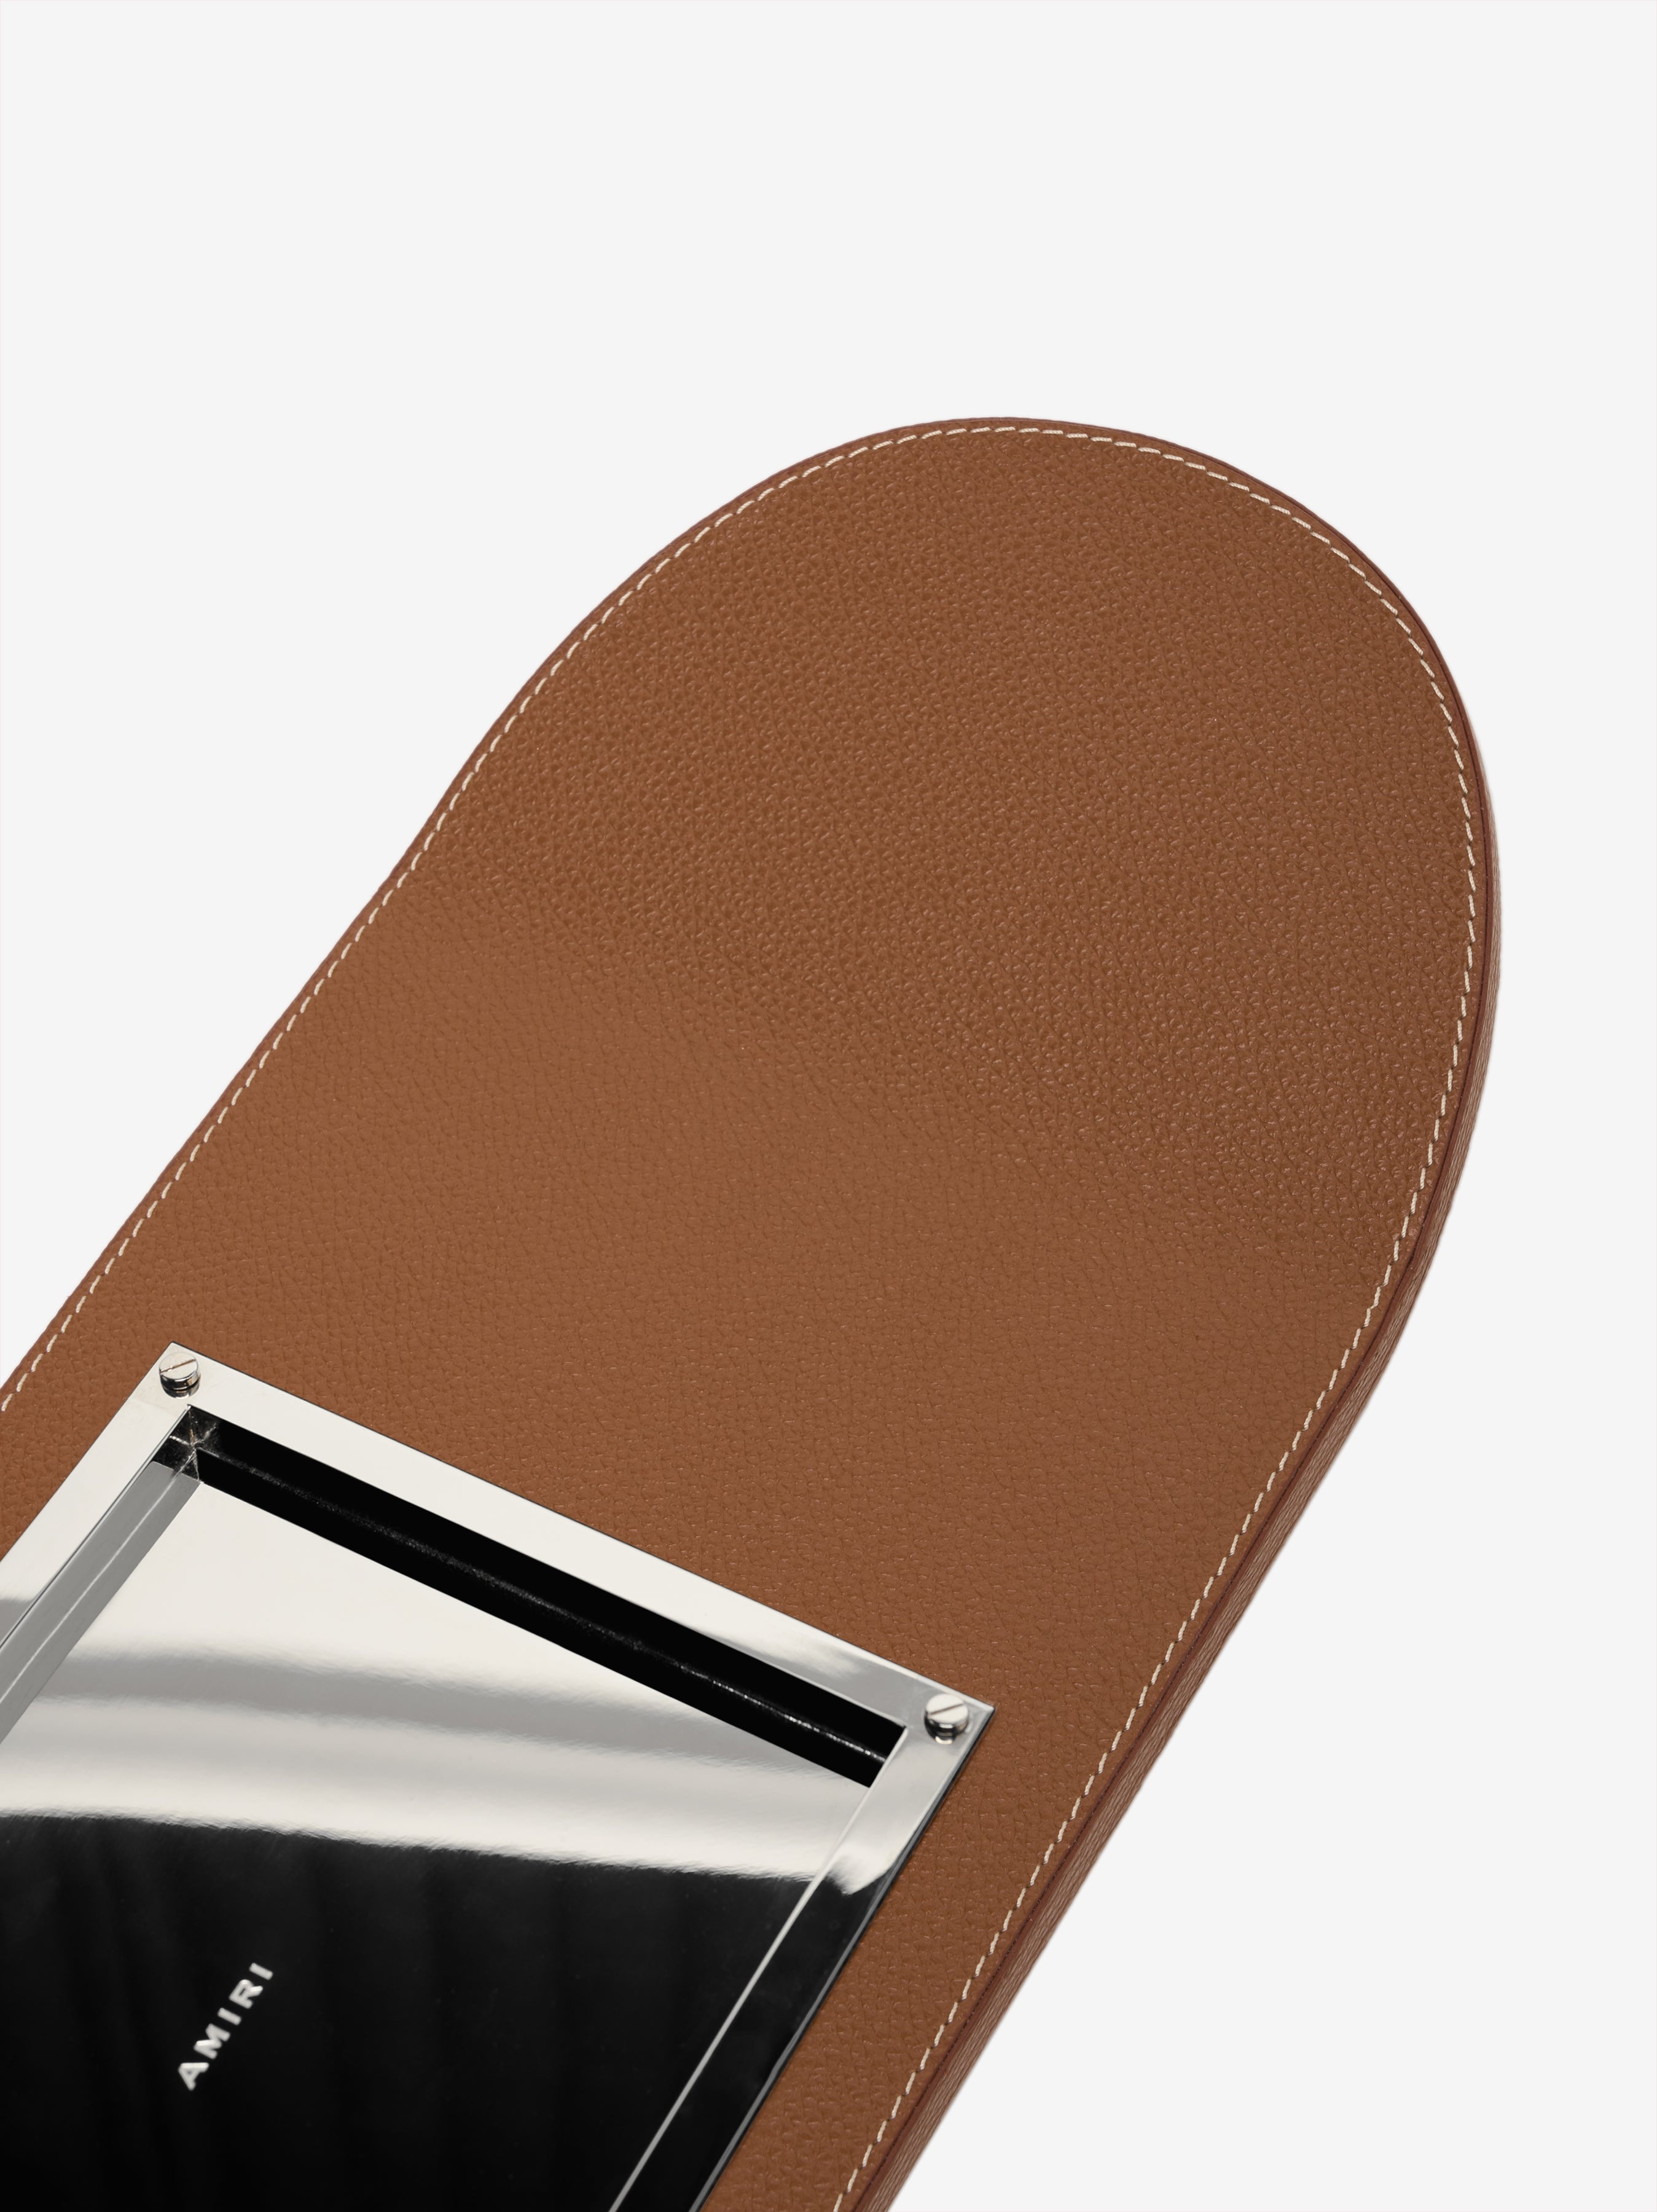 EXCLUSIVE LEATHER SKATE DECK CATCH TRAY - 4